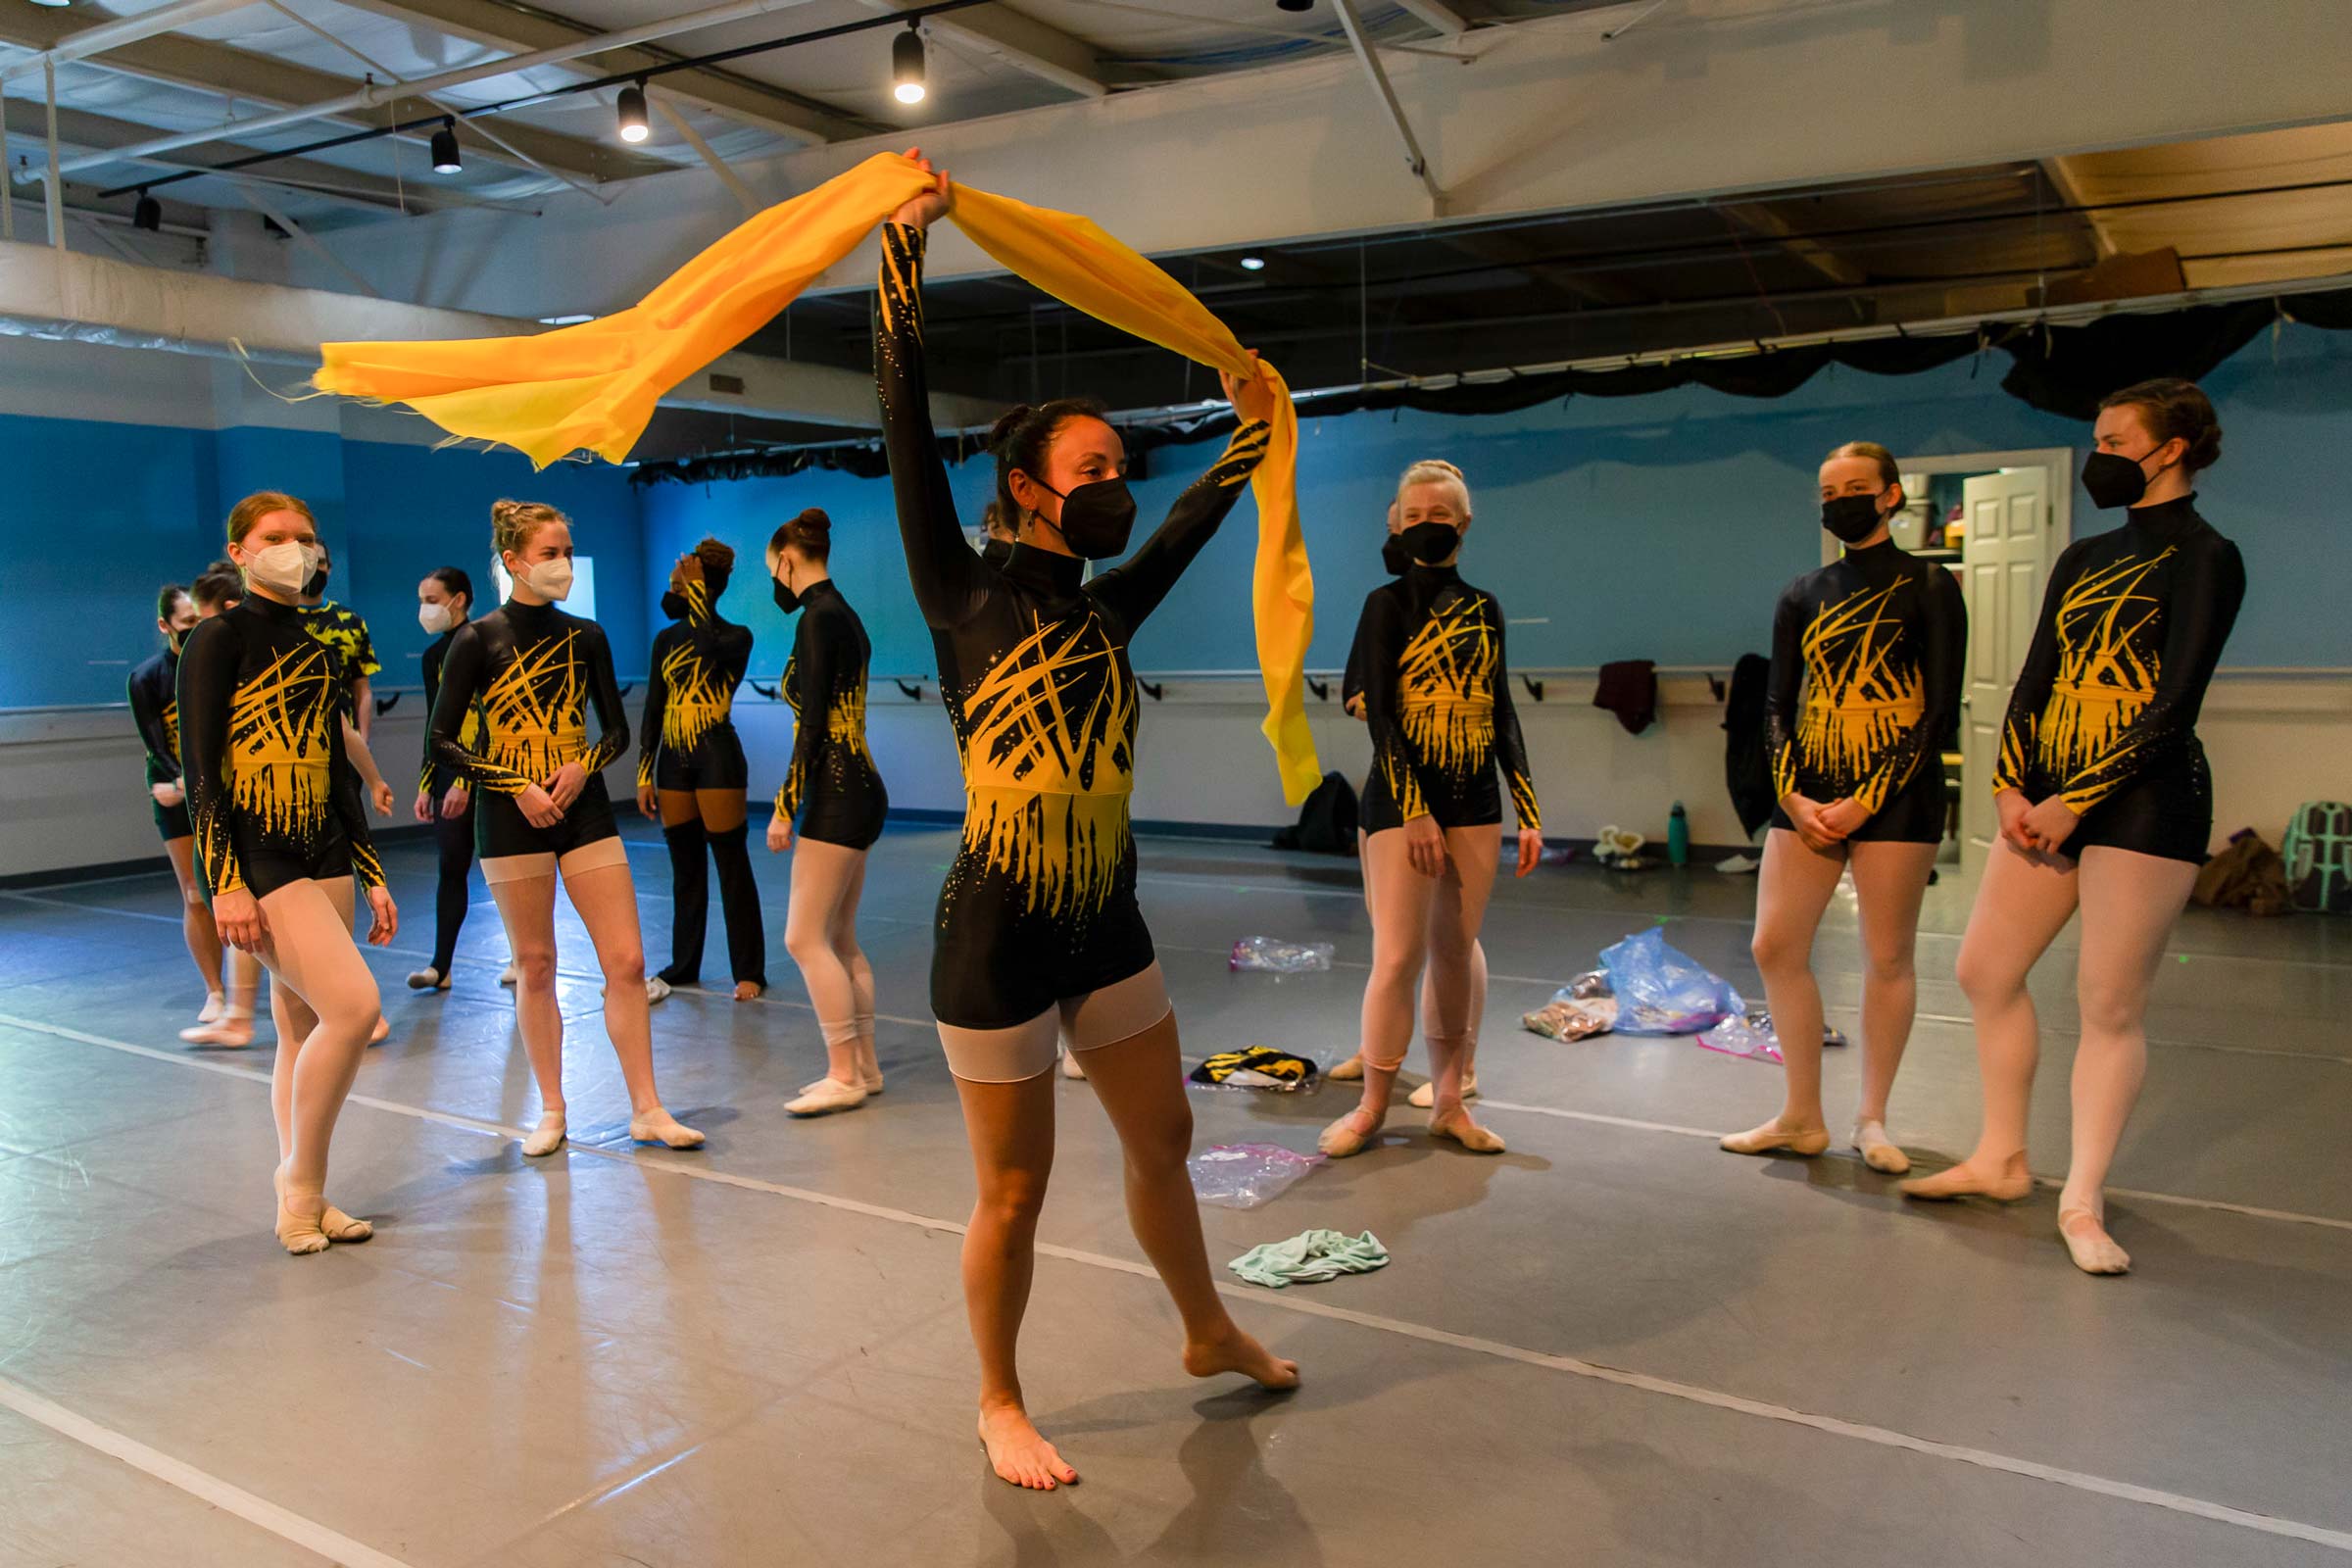 Ballet dances in black and yellow body suits stand in a half-circle, watching a woman dance while holding a yellow scarf